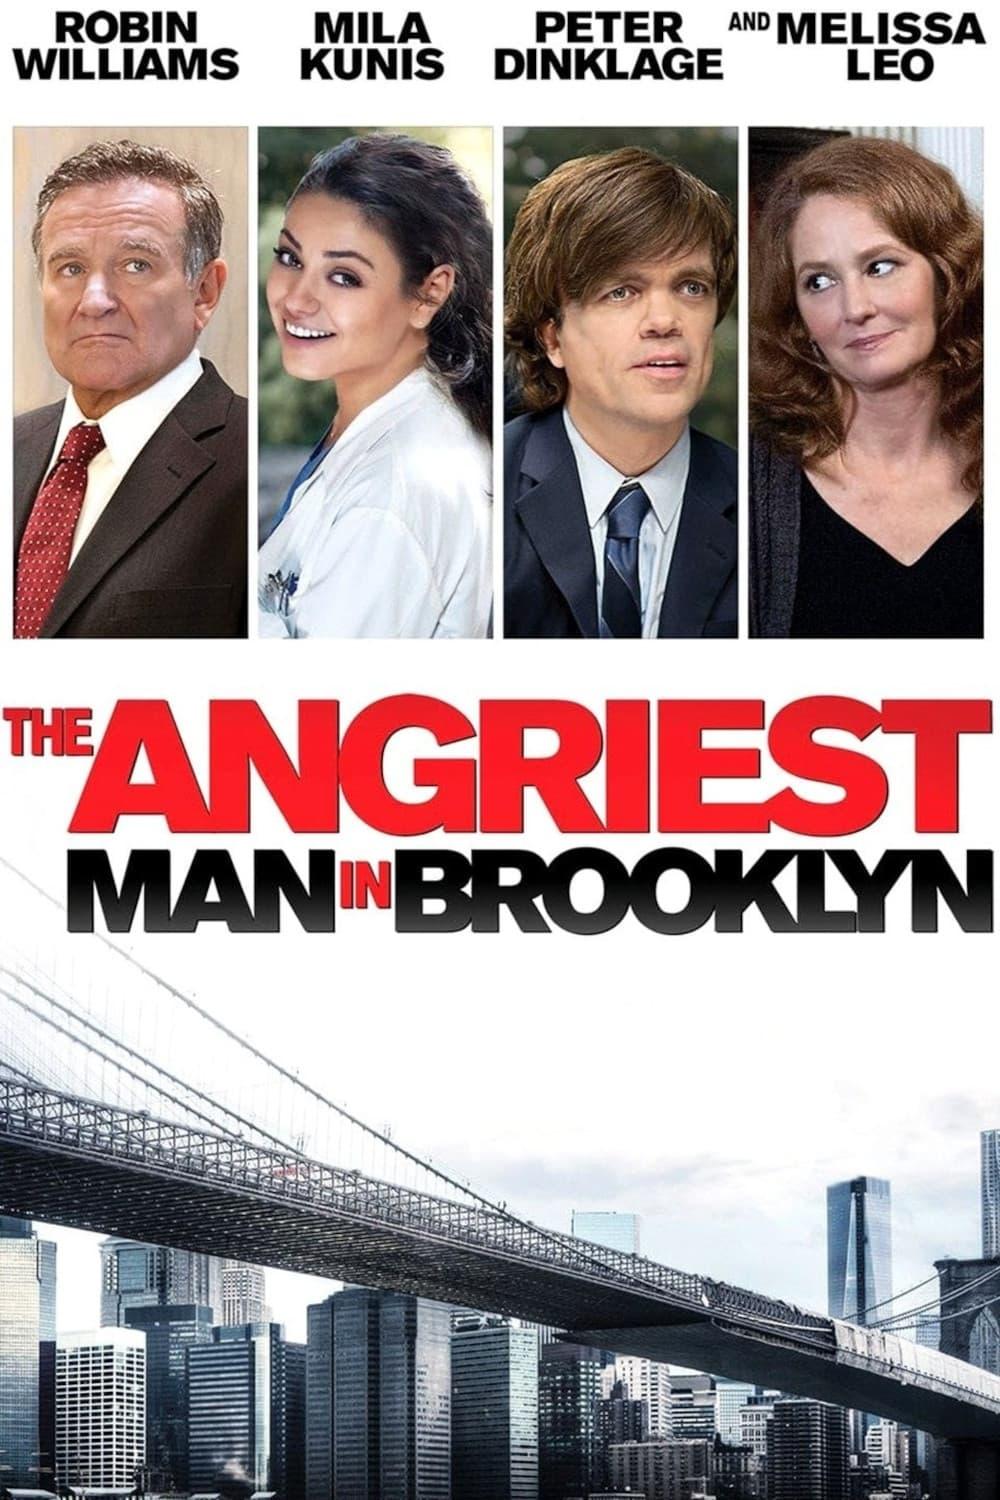 The Angriest Man in Brooklyn poster